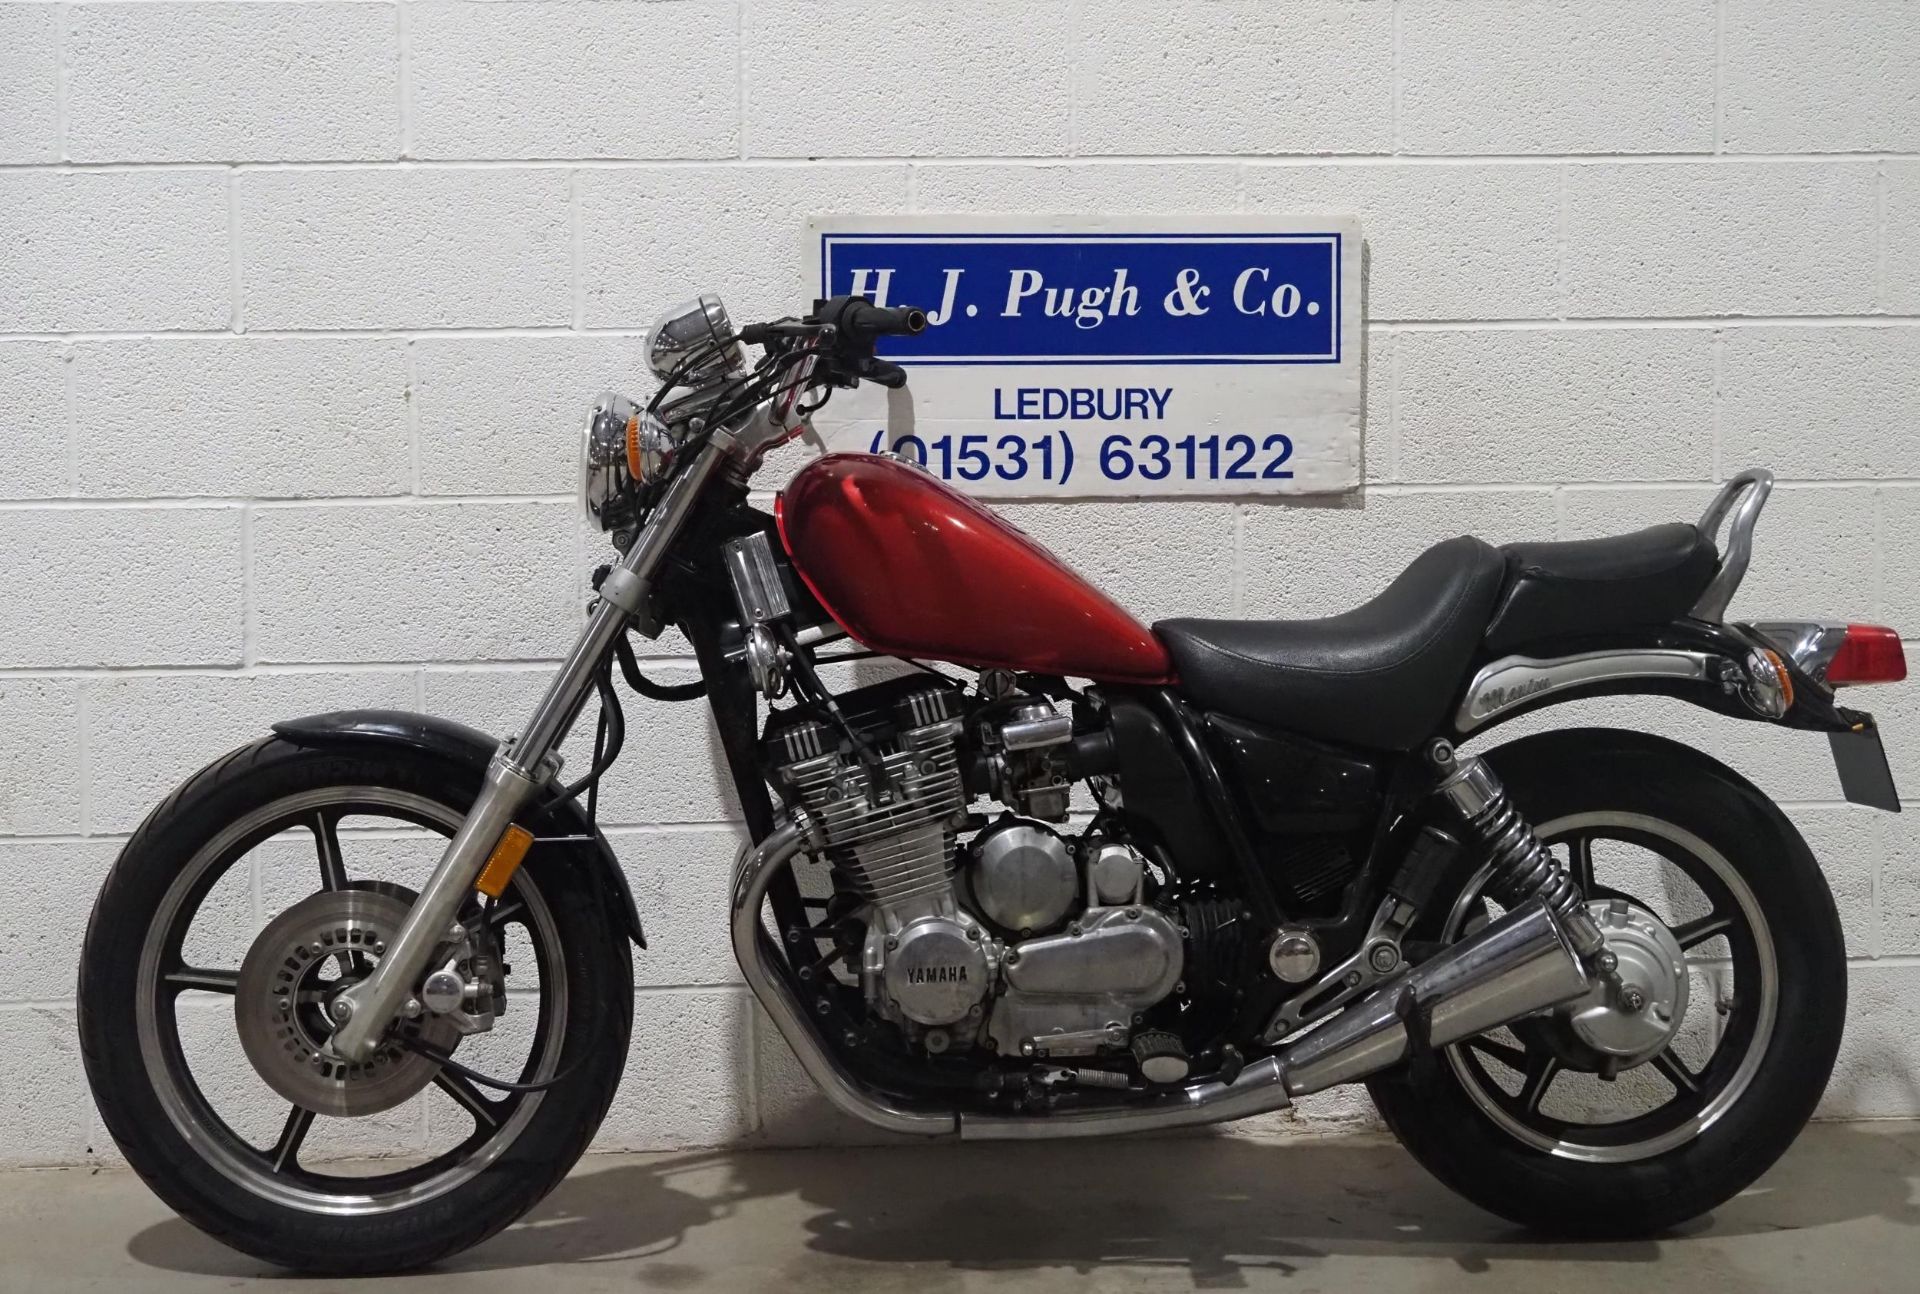 Yamaha XJ750 Maxim motorcycle. 1985. 697cc. Runs and rides but not ridden since last MOT on the 03. - Image 6 of 6